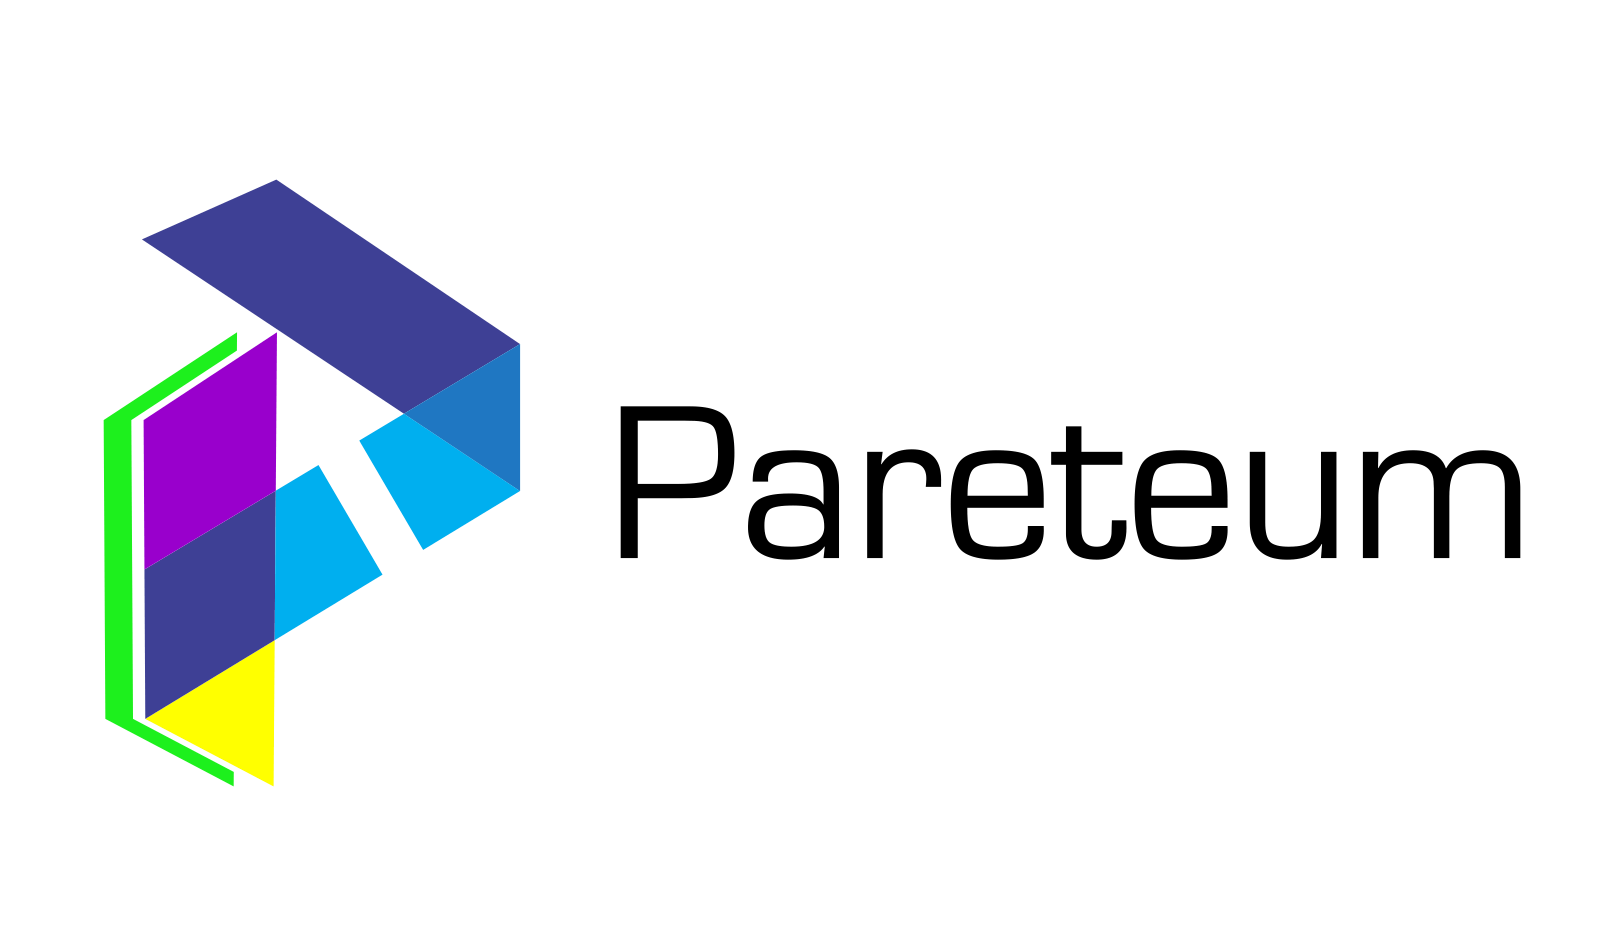 Conglomerate Logo - Pareteum Awarded $3.5 Million Agreement by British Multinational ...